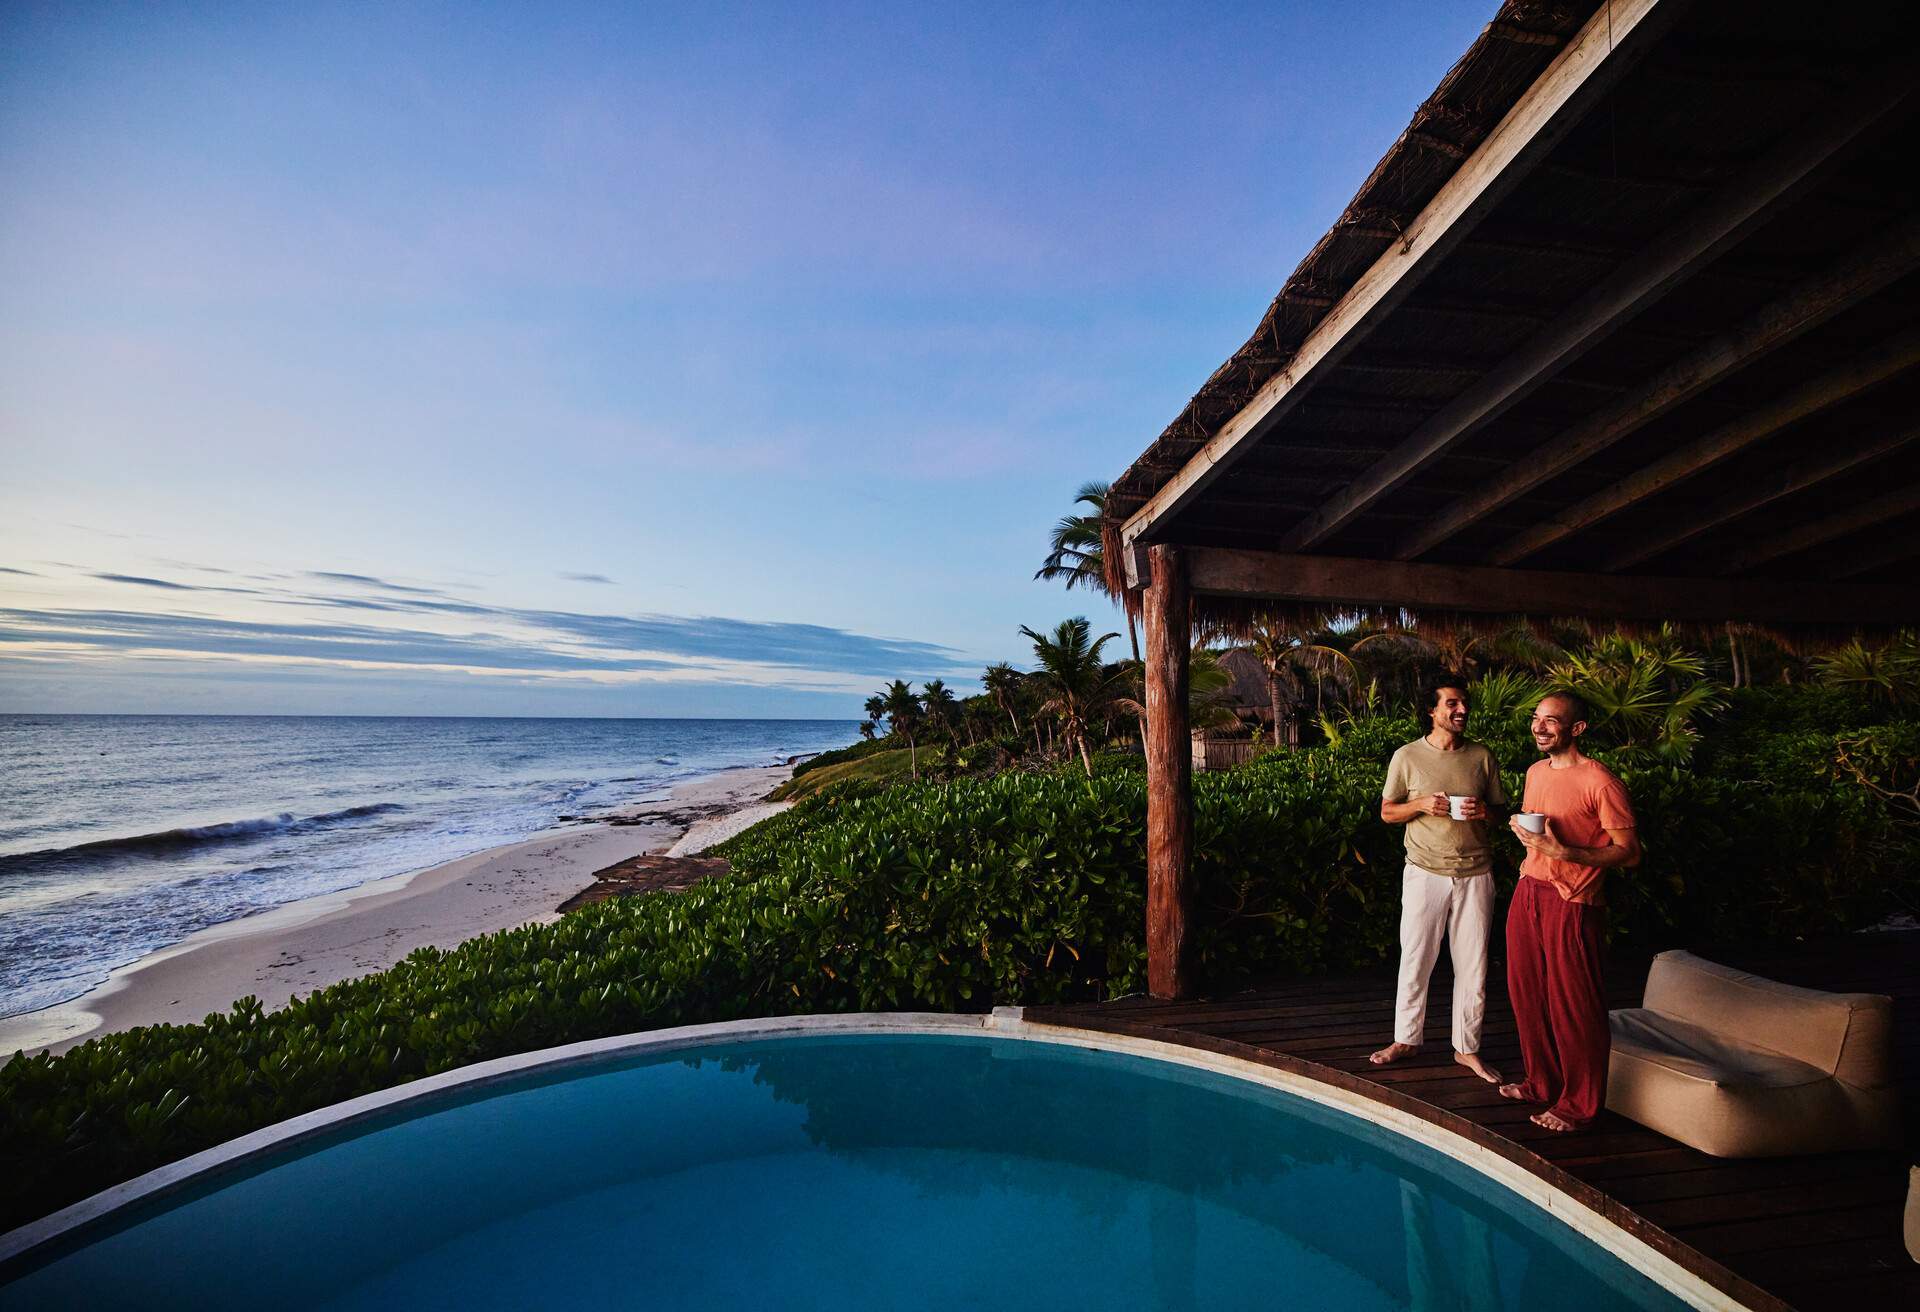 Wide shot of gay couple standing poolside watching sunrise at luxury tropical villa overlooking beach and ocean, Mexico